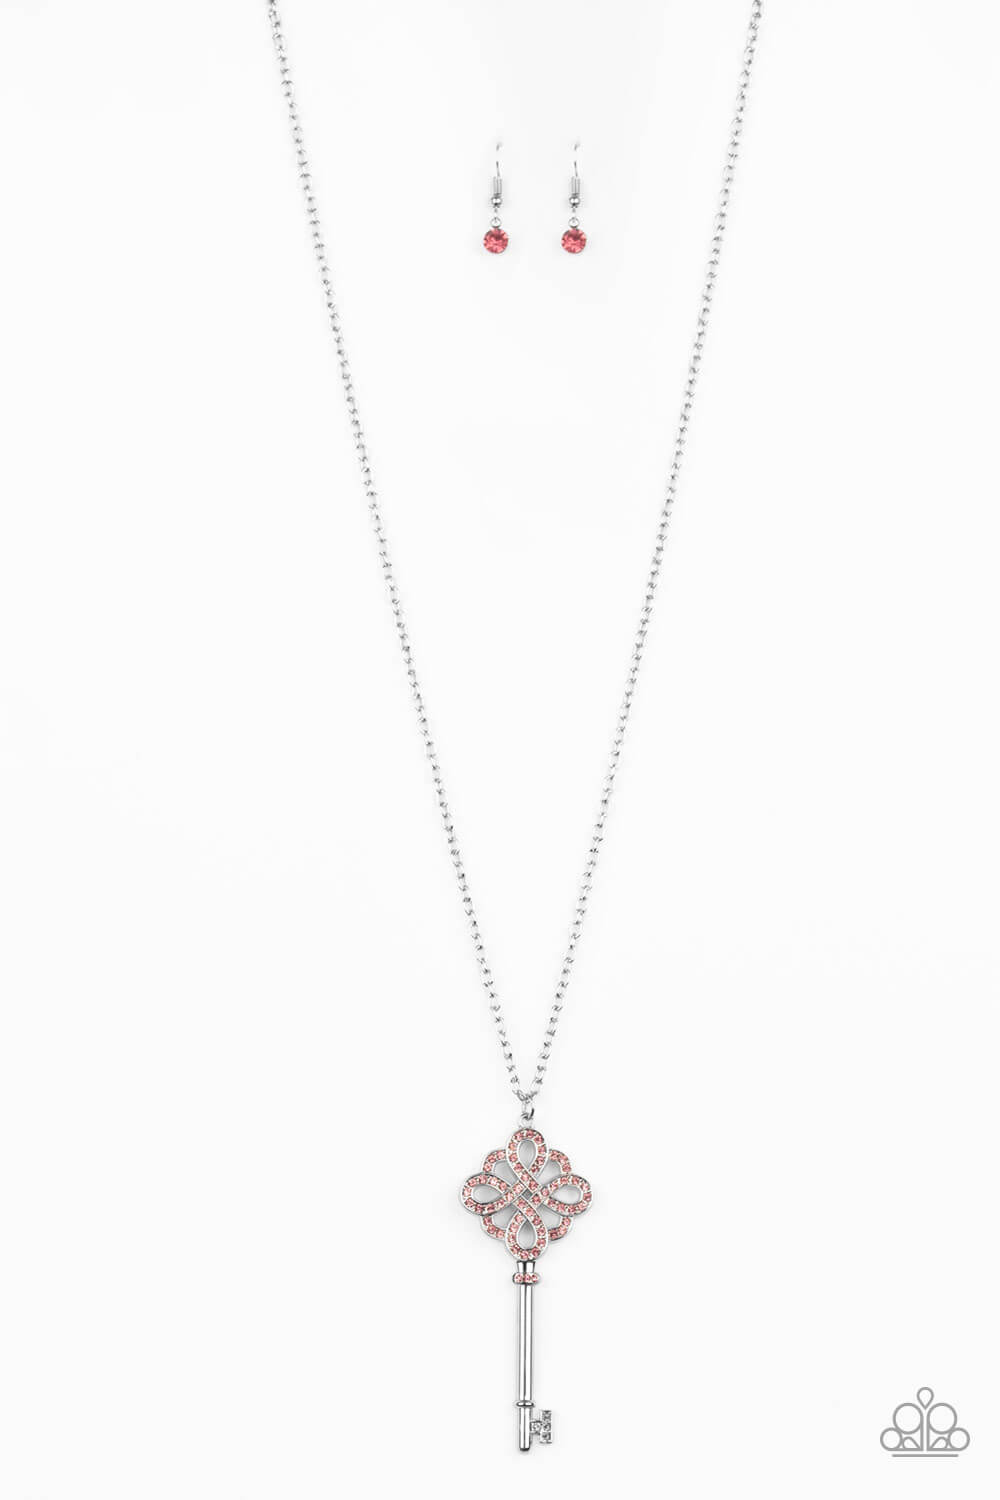 Unlocked - Pink Life Of The Party Exclusive Necklace Set - Princess Glam Shop